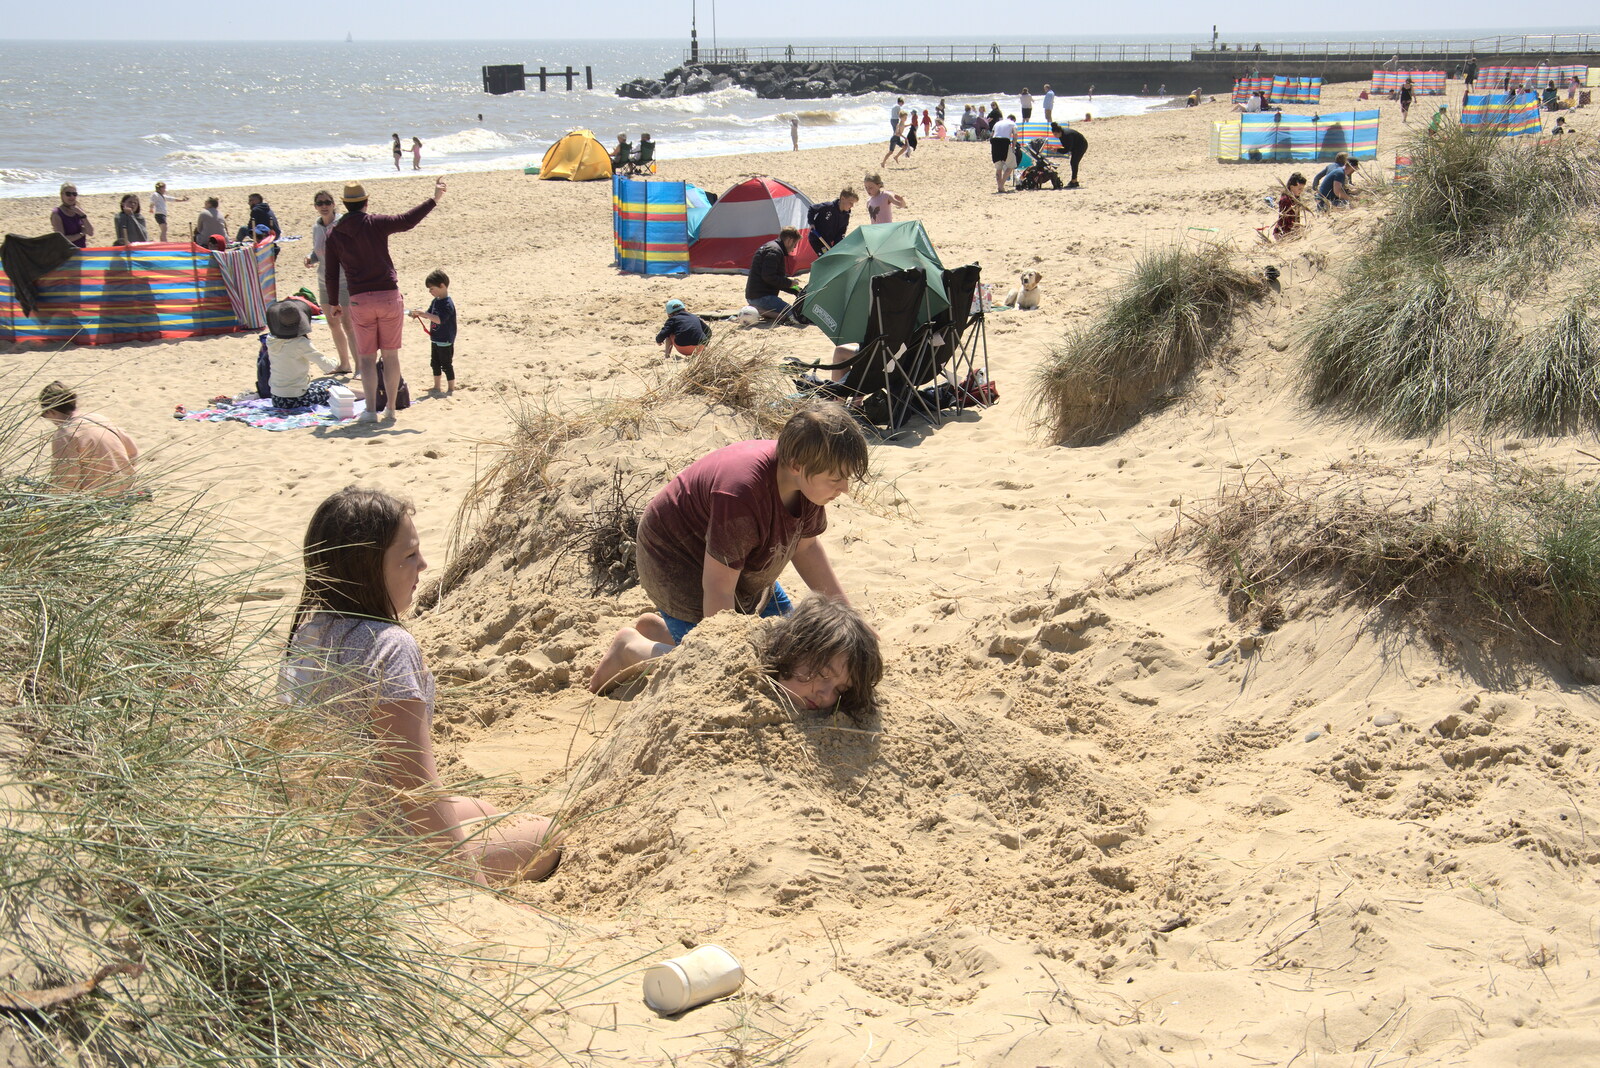 The beach is heaving from A Day at the Beach with Sis, Southwold, Suffolk - 31st May 2021